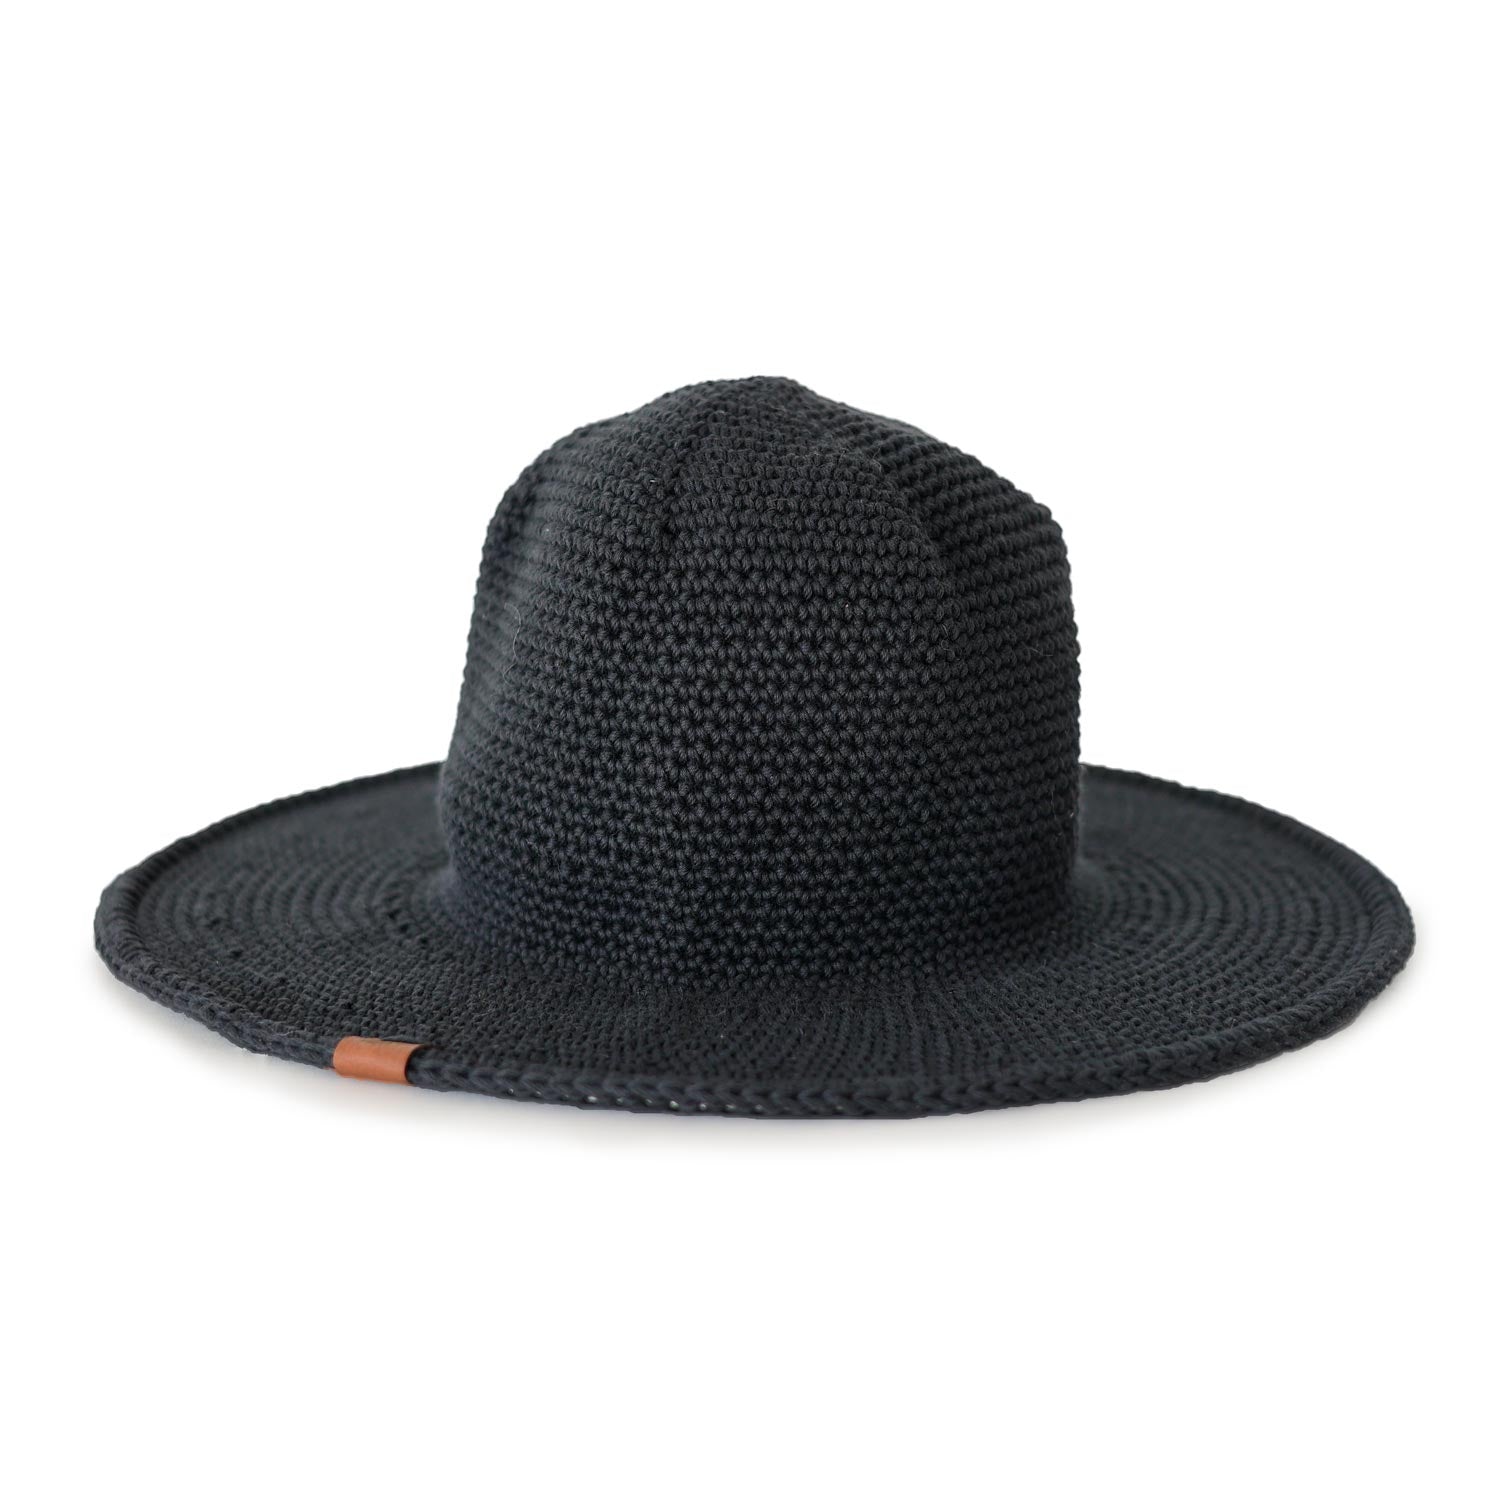 Black Cotton Crocheted Packable Sun Hat with a flexible wire brim. Stretchy to fit all sizes. Can be packed and folded easily in any size bag. An Subtle Black Ash Color option from low-impact dyes